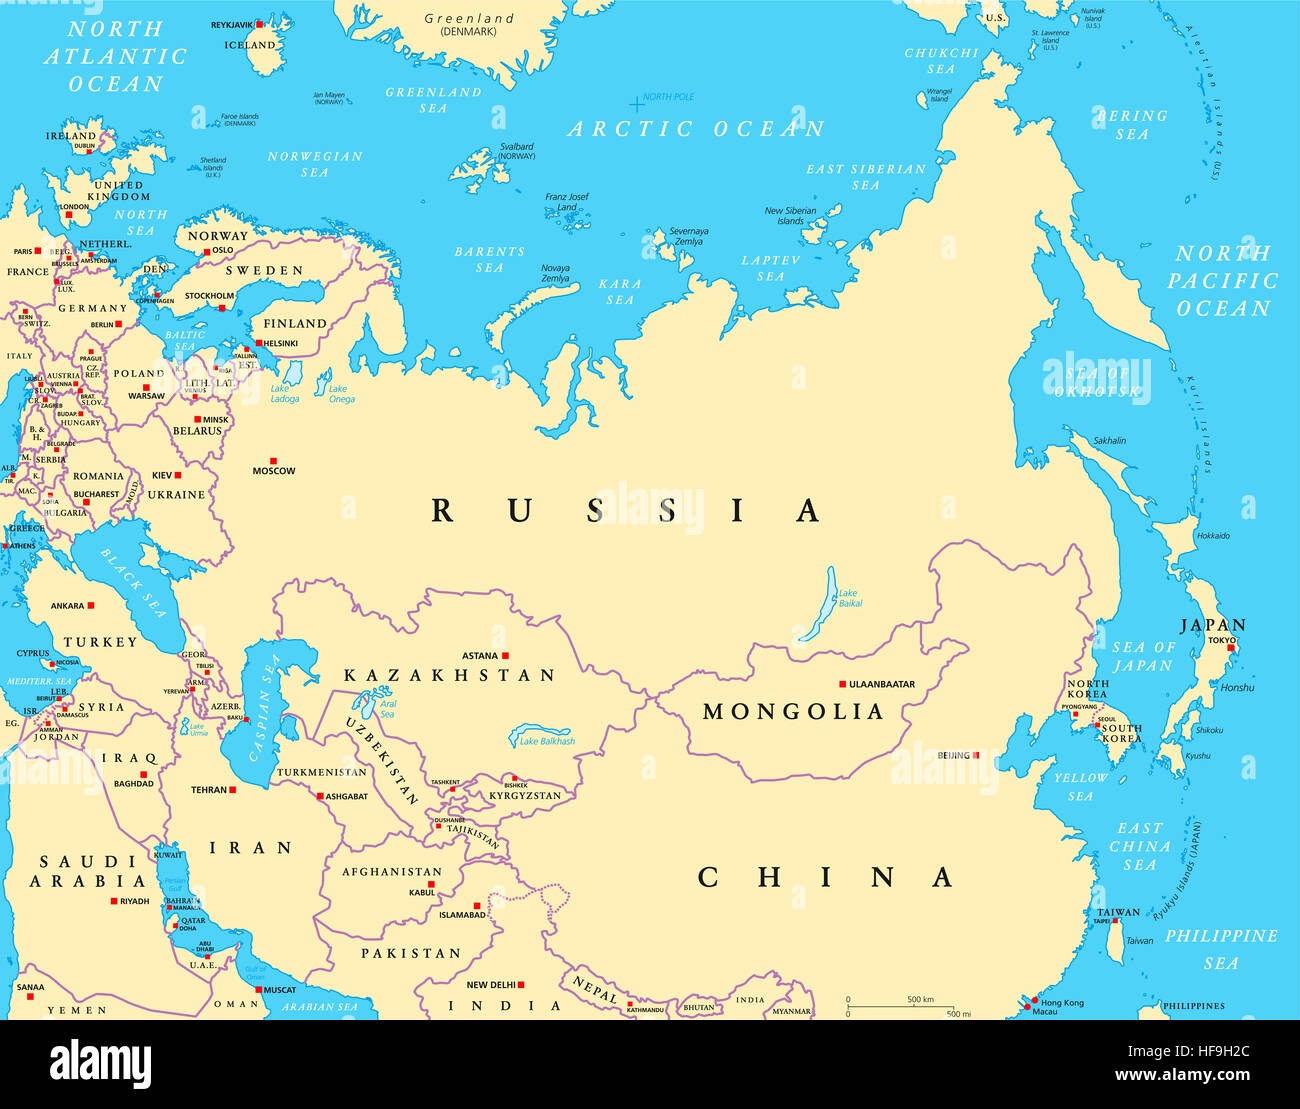 Eurasia political map with capitals and national borders. Combined parts of the continental landmass of Europe and Asia. Stock Photo